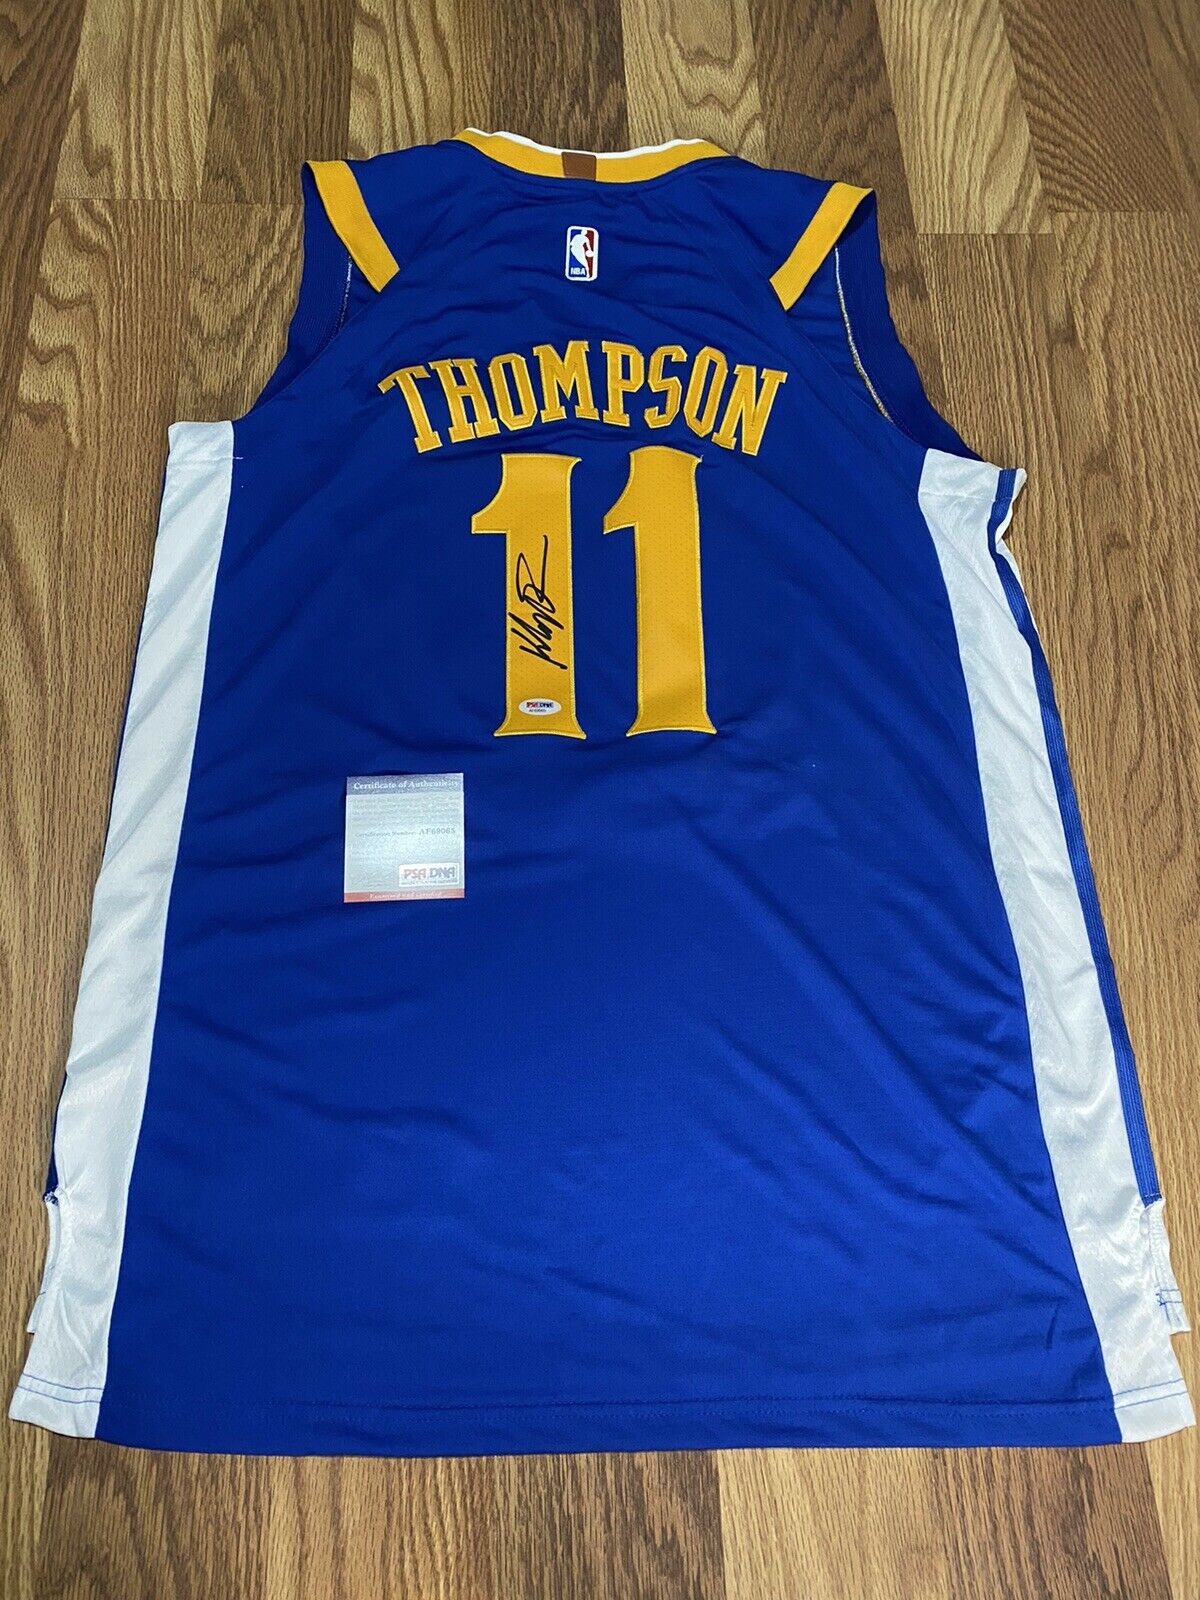 Klay Thompson Signed Jersey Autograph Psa/dna Golden State Warriors Autographed